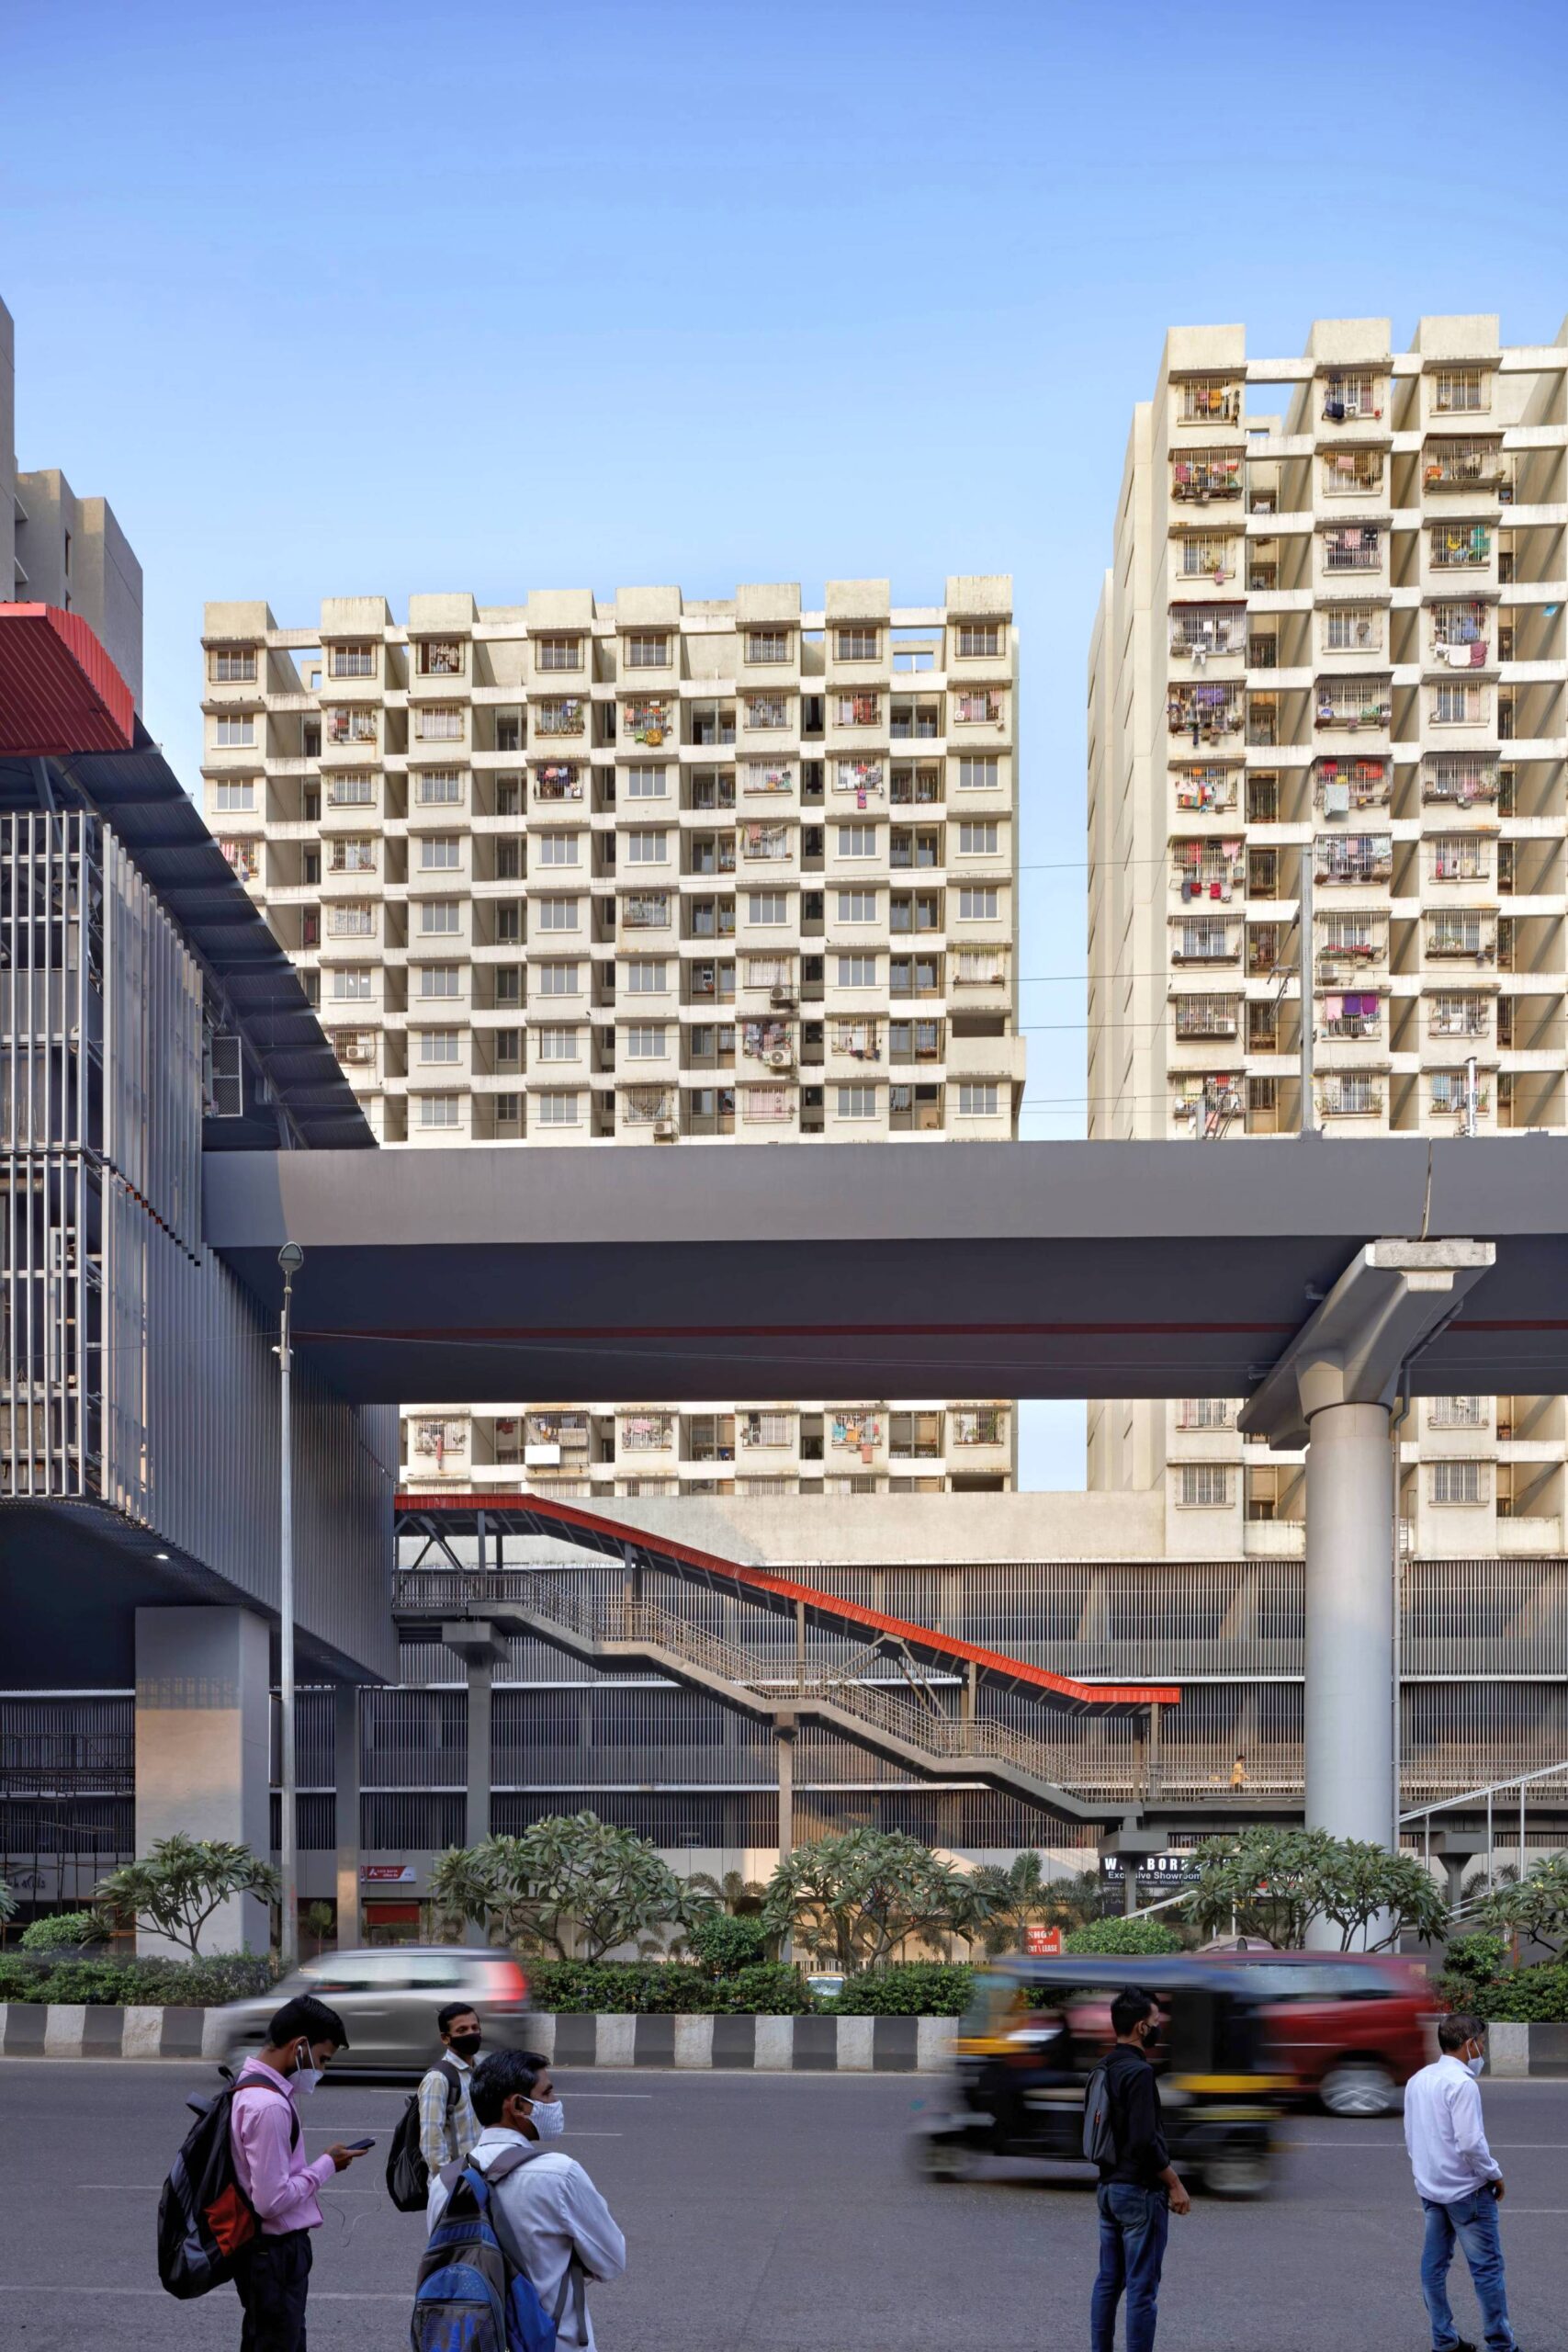 Mumbai Metro Stations-A case for Architects and Architecture-Sourabh Gupta, Archohm 65